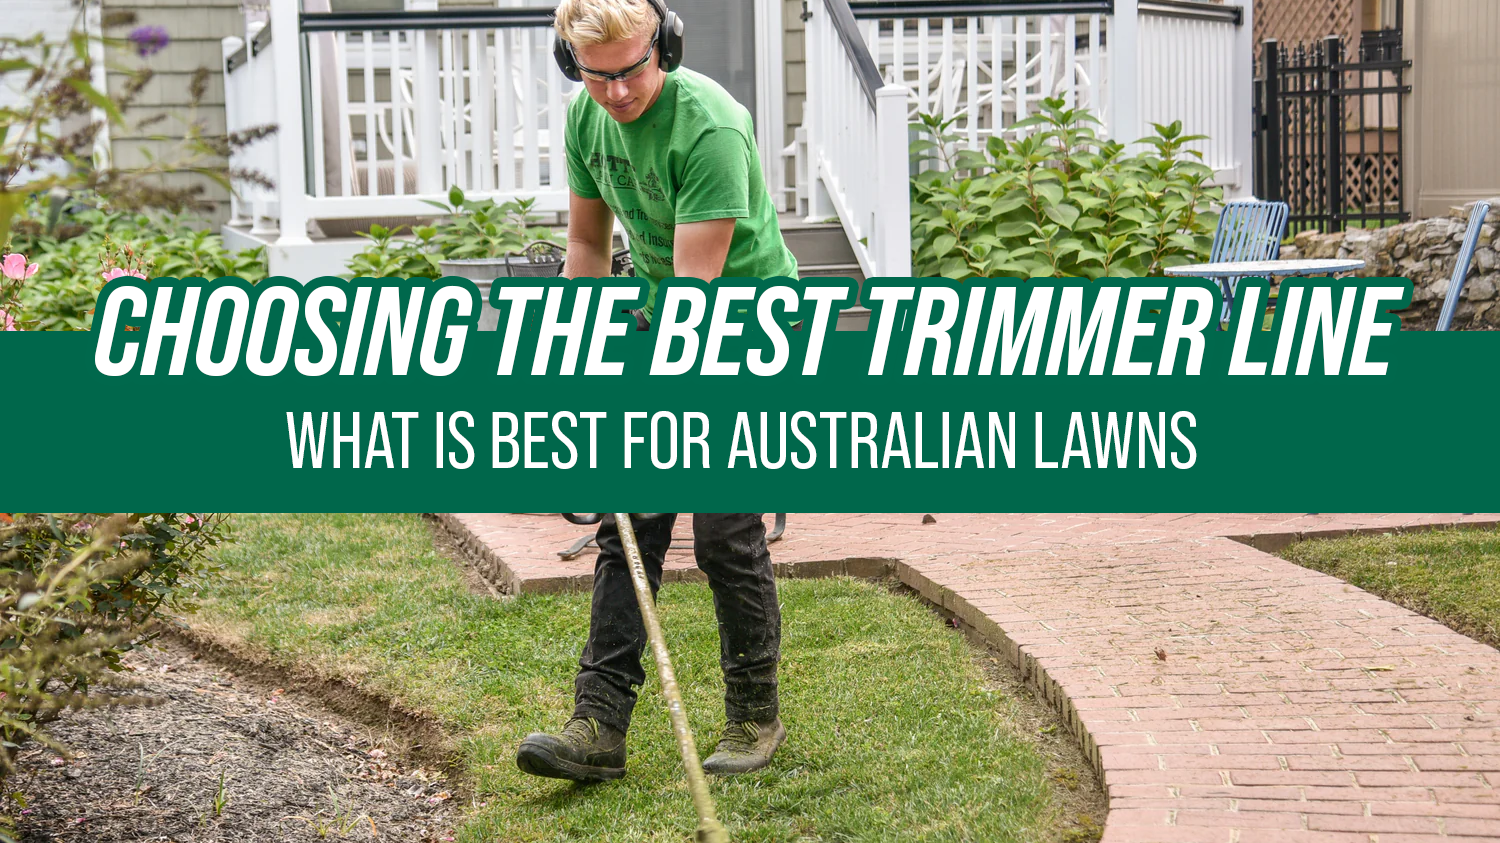 The Ultimate Guide to Choosing the Best Trimmer Line Types for Australian Lawns